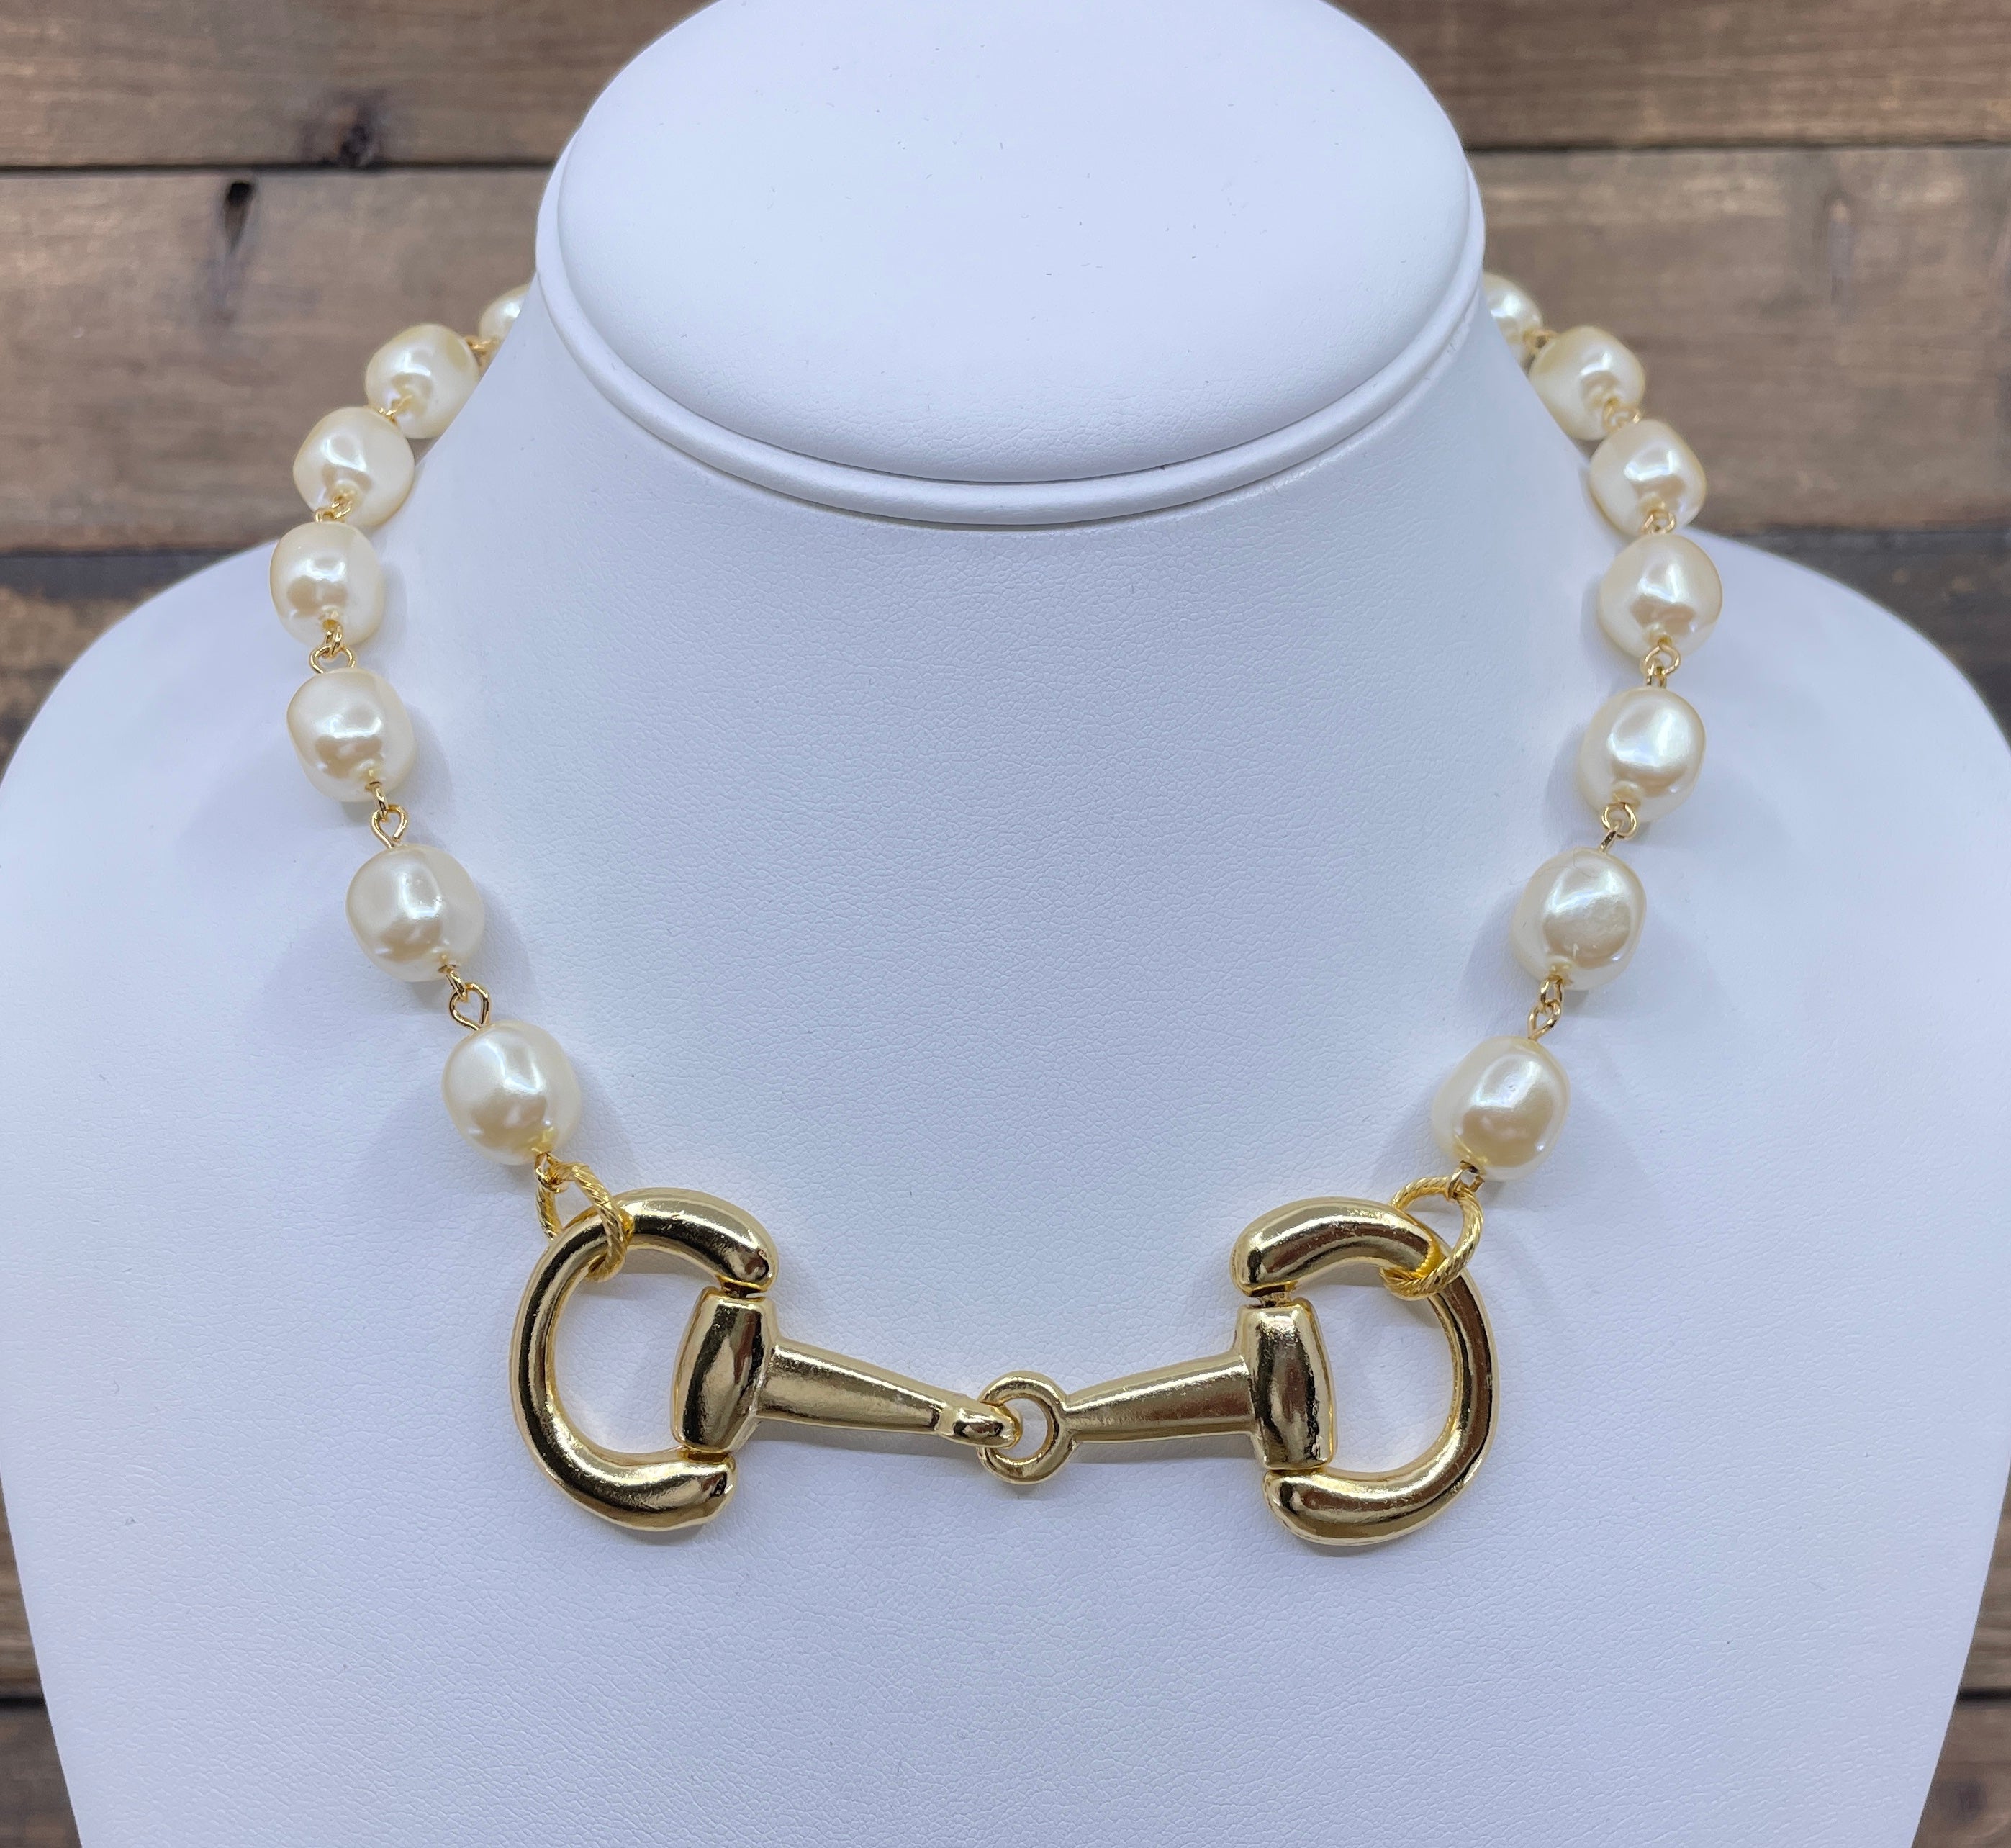 Vintage Pearl Necklace With A Gold-Plated Buckle